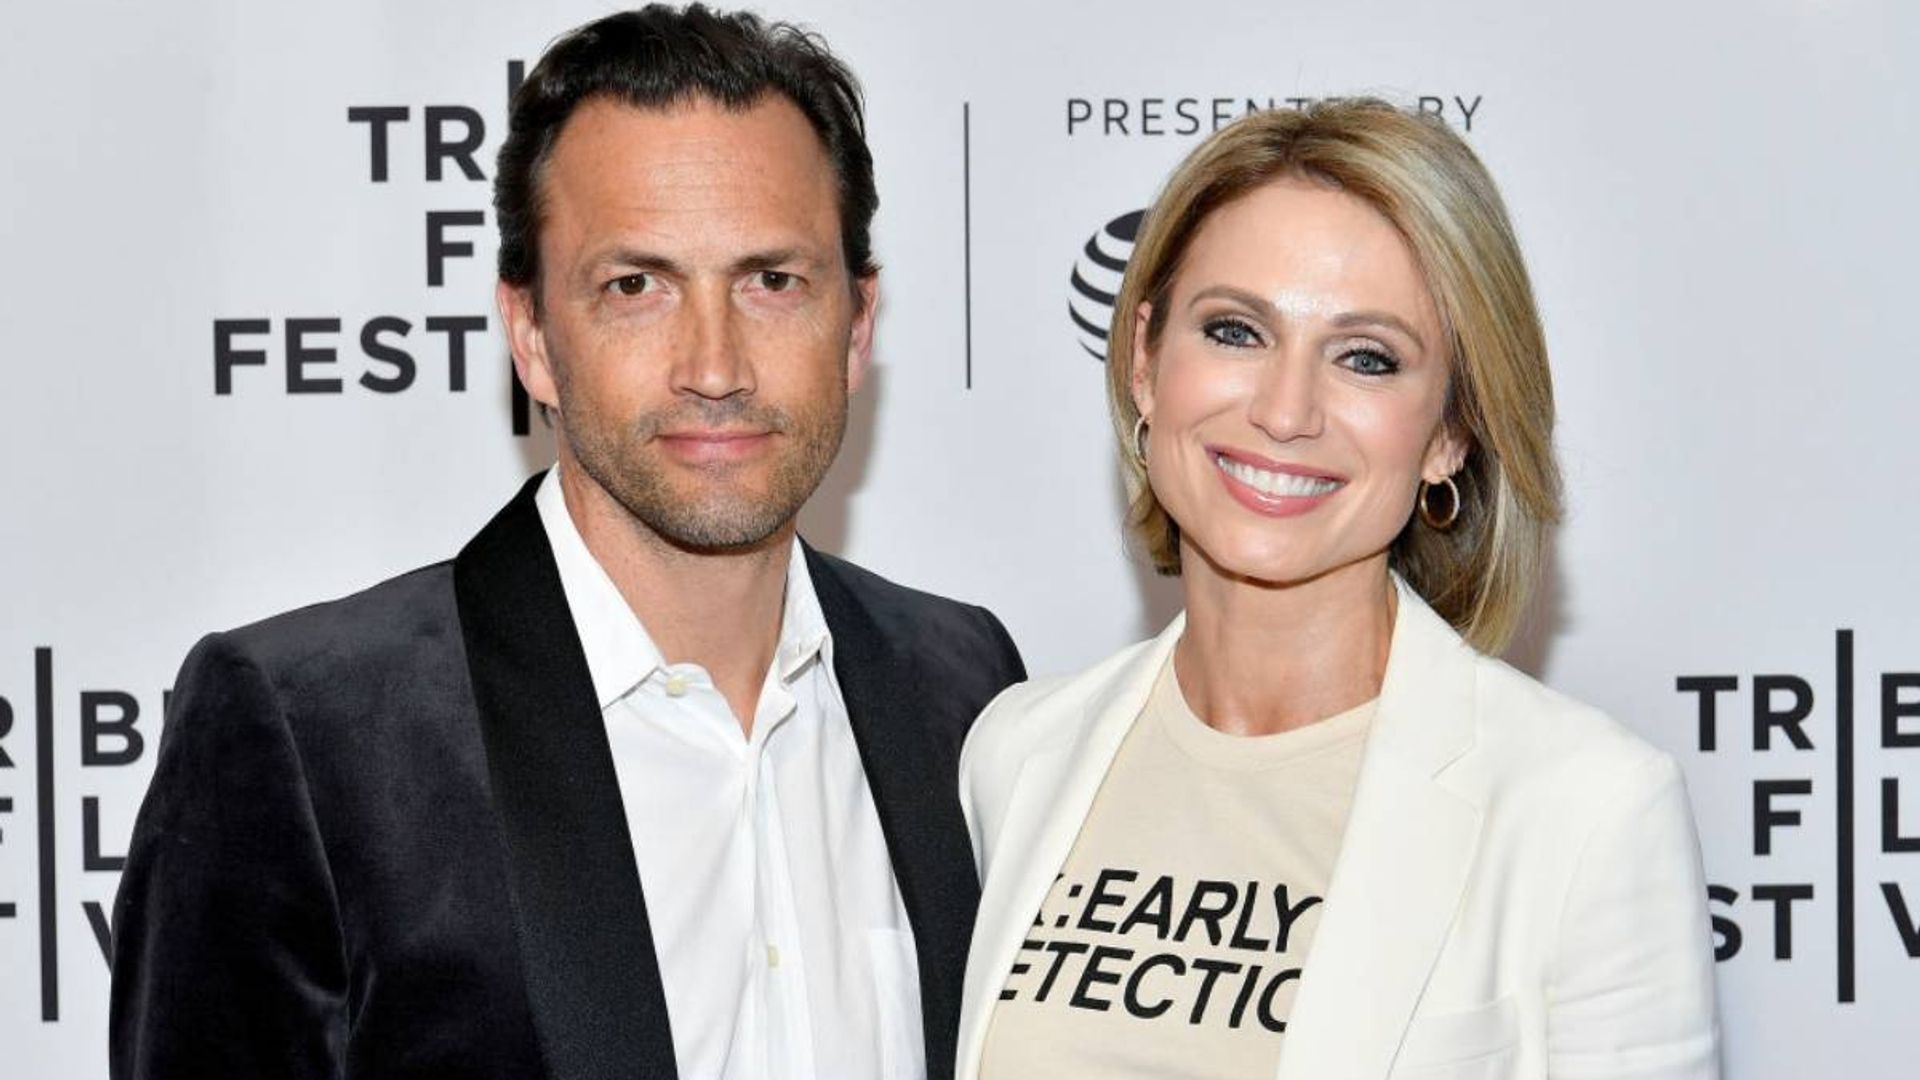 Amy Robach claims Andrew Shue never bought engagement ring as T.J. Holmes says 'I want to marry you'